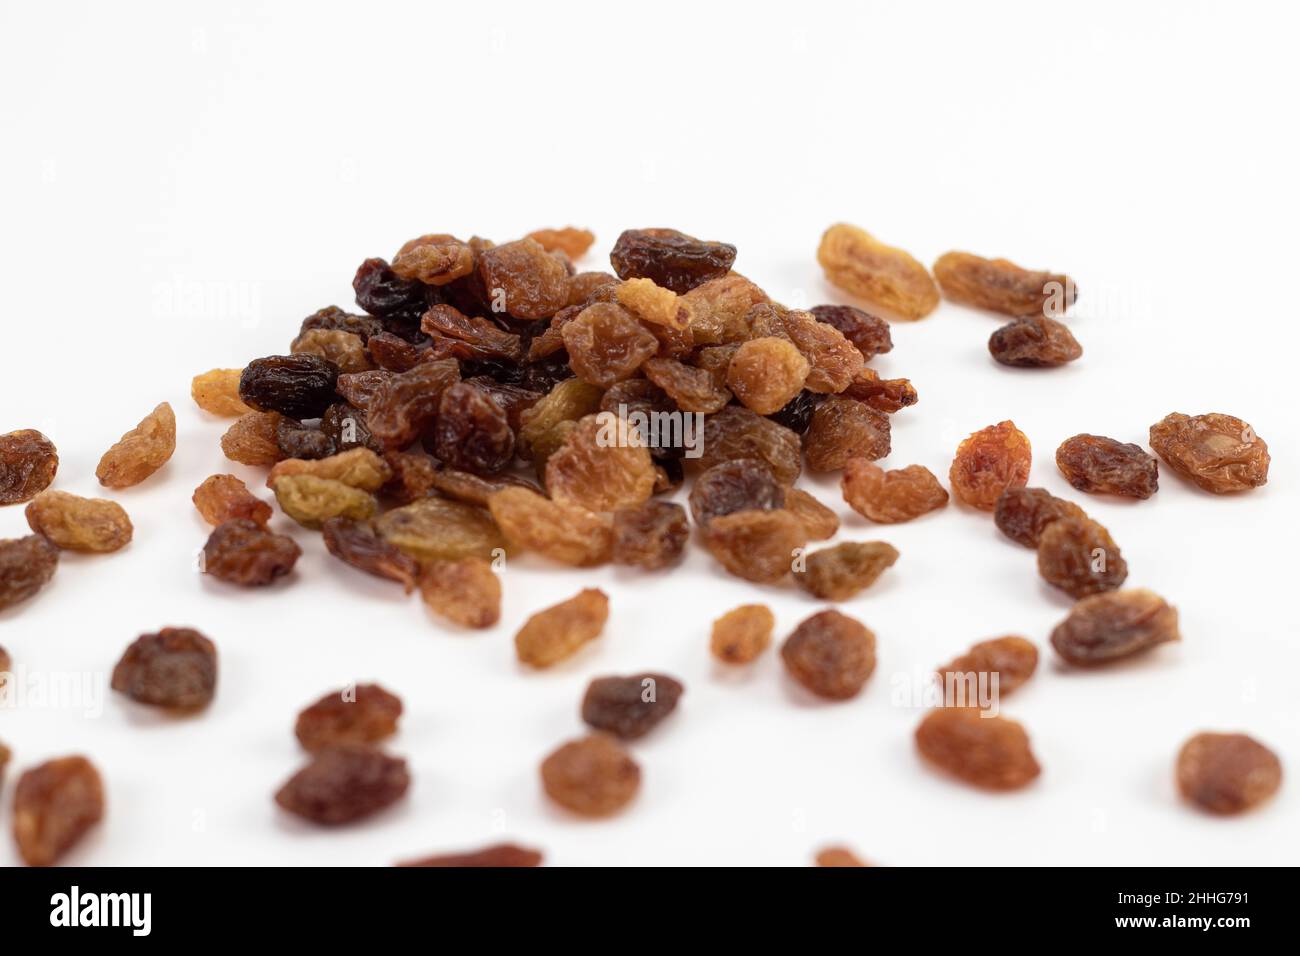 Tasty dried raisins isolated on a white background Stock Photo